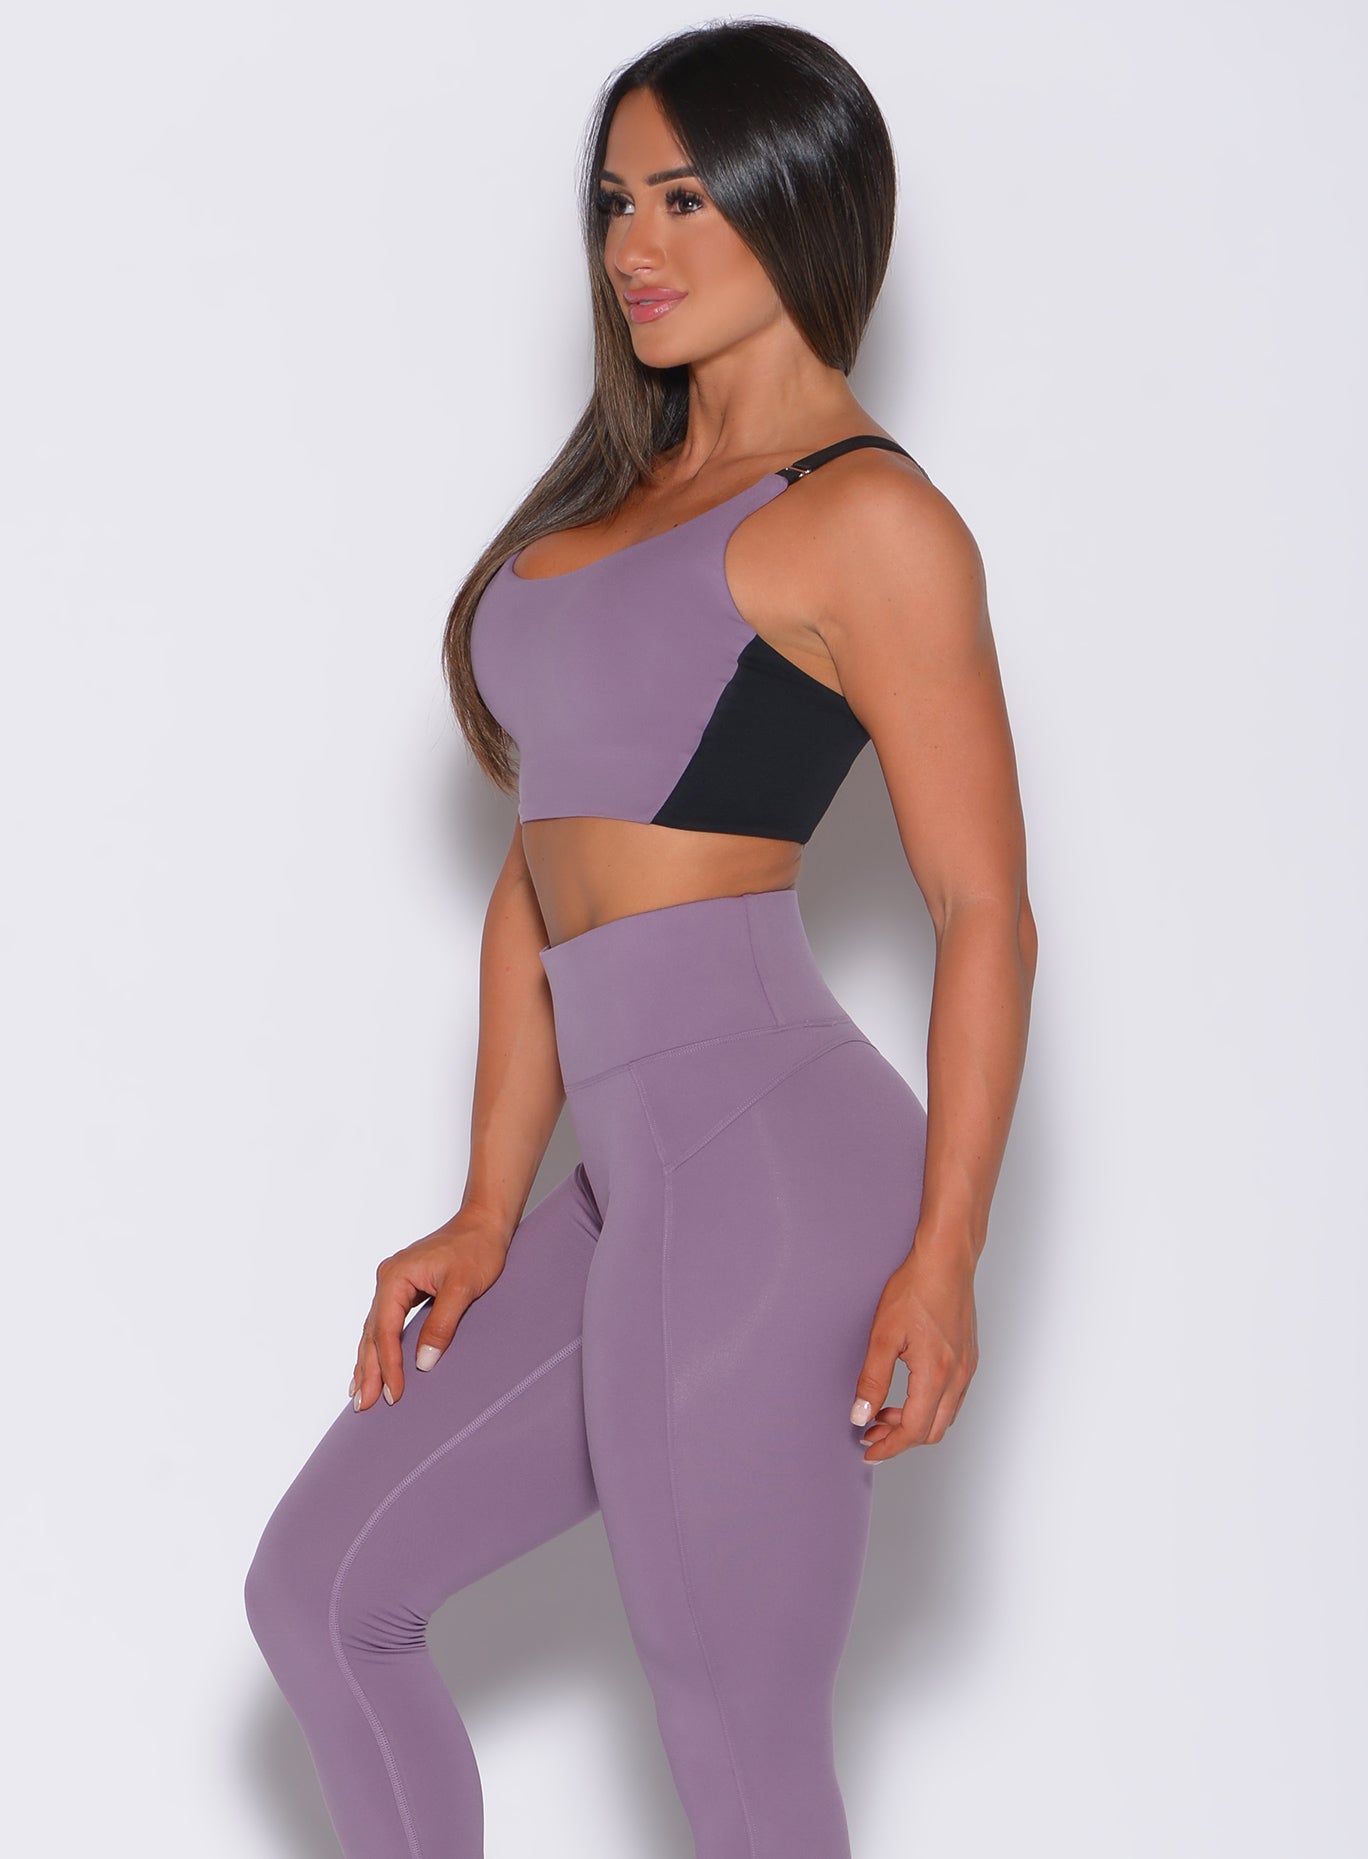 Left side profile view of a model in our banded sports bra in violet frost color and a matching leggings